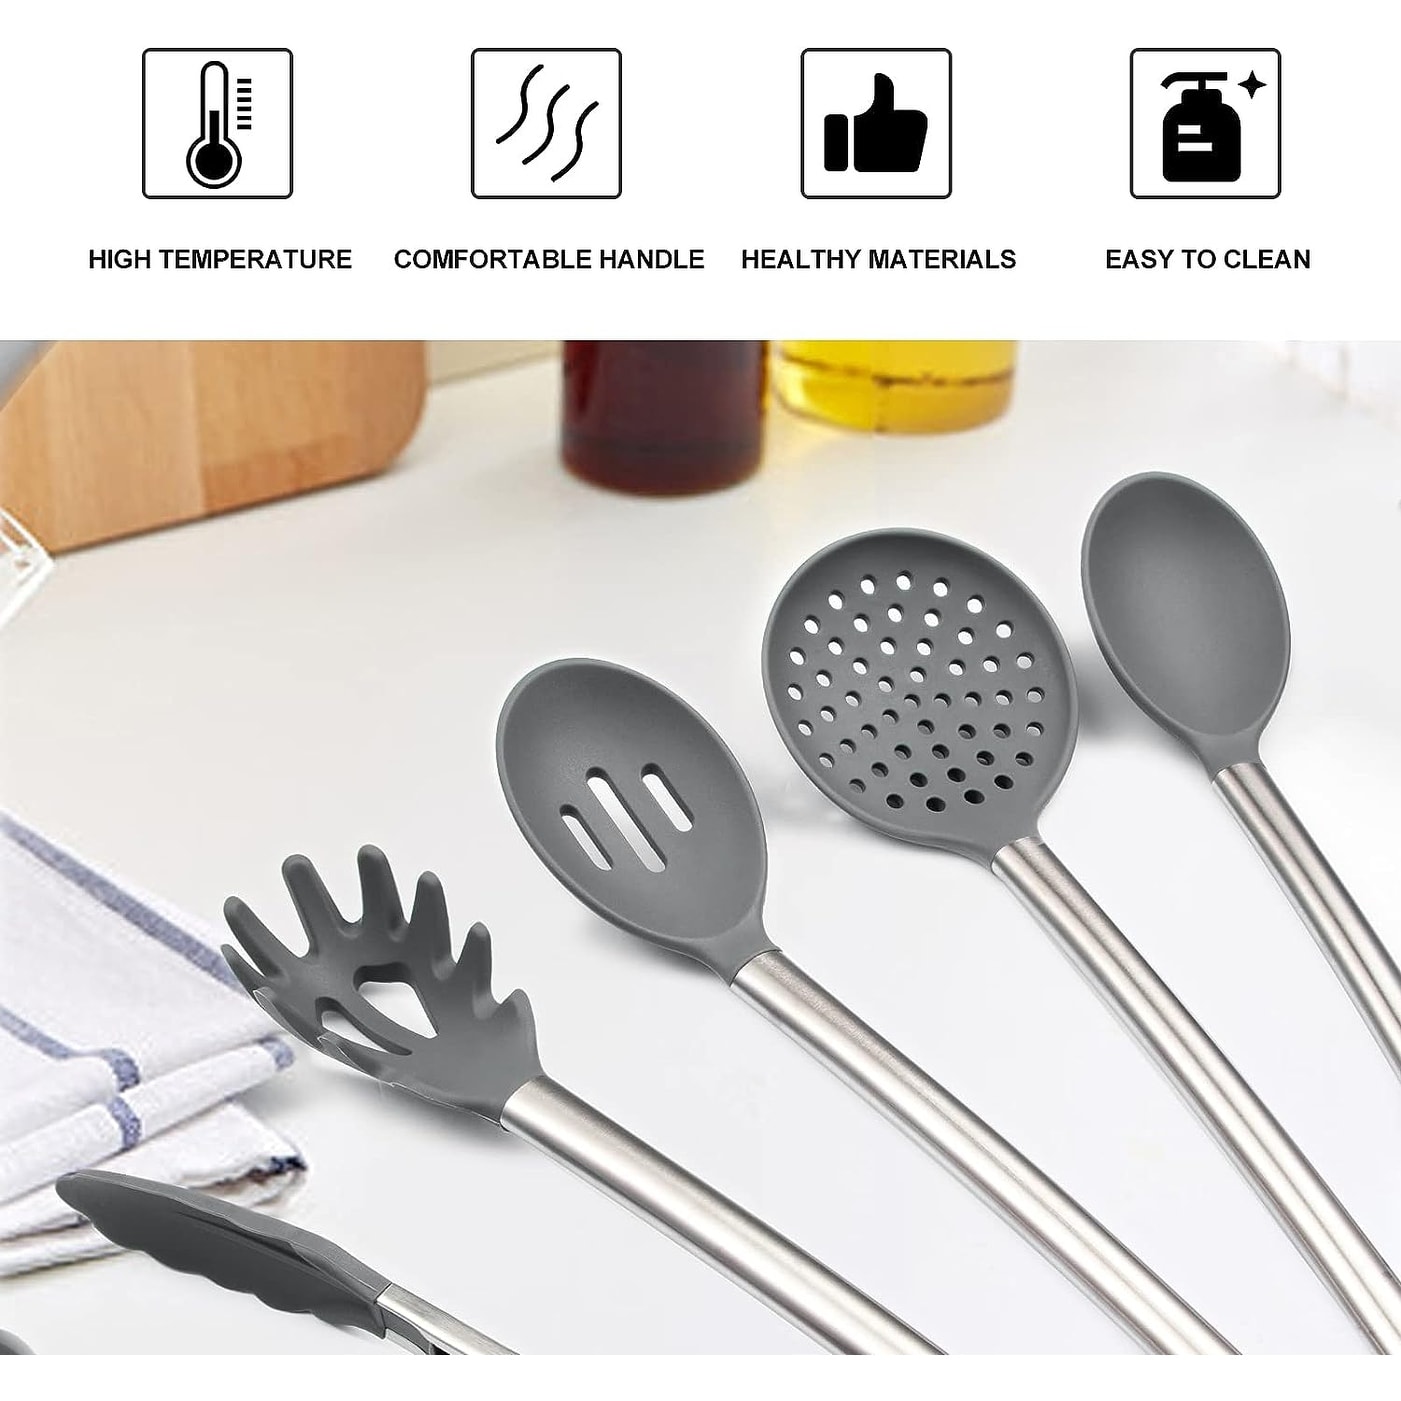 https://ak1.ostkcdn.com/images/products/is/images/direct/8f3e178d3f5647a16bc1f3224fdd766bfab112f7/Kitchen-Utensils-Set-with-Holder%2C-Silicone-Cooking-Utensils-Gadget.jpg